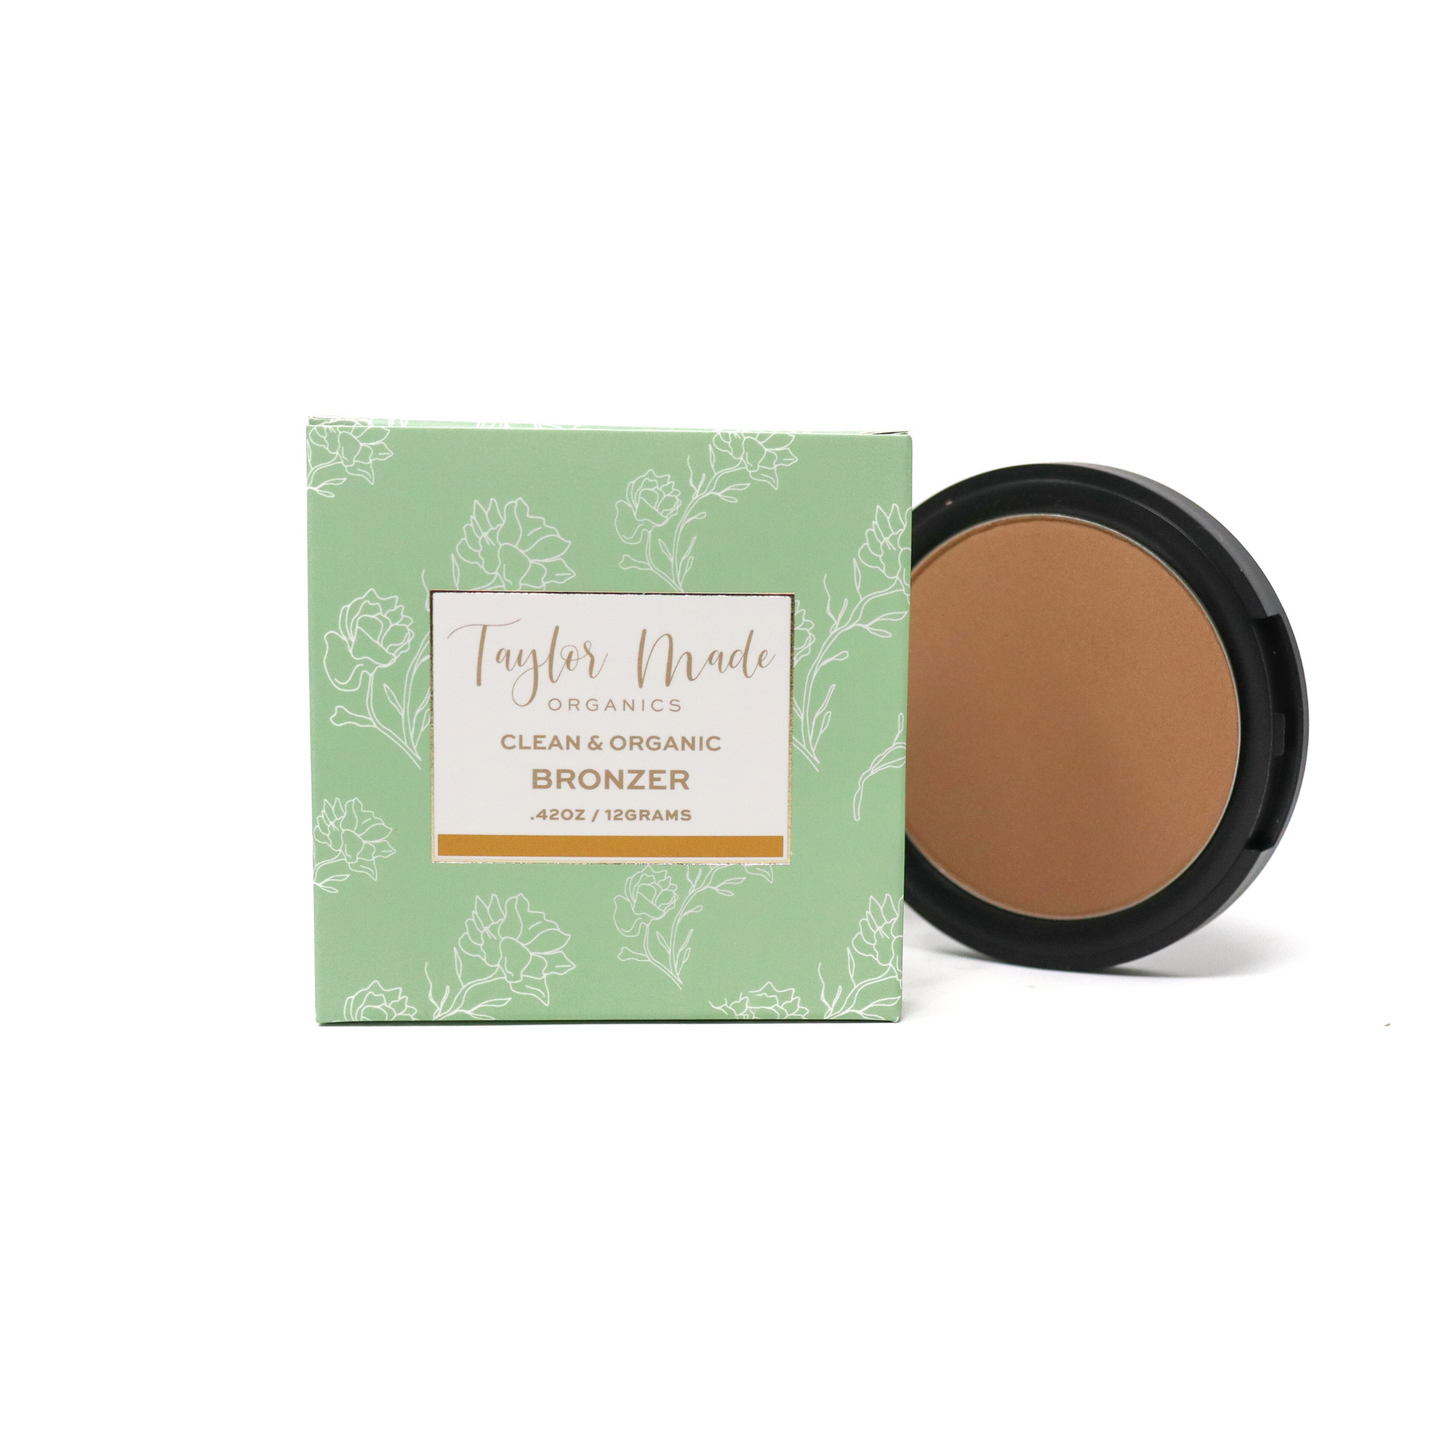 Load image into Gallery viewer, Daybreak pressed bronzer | Taylor Made Organics
